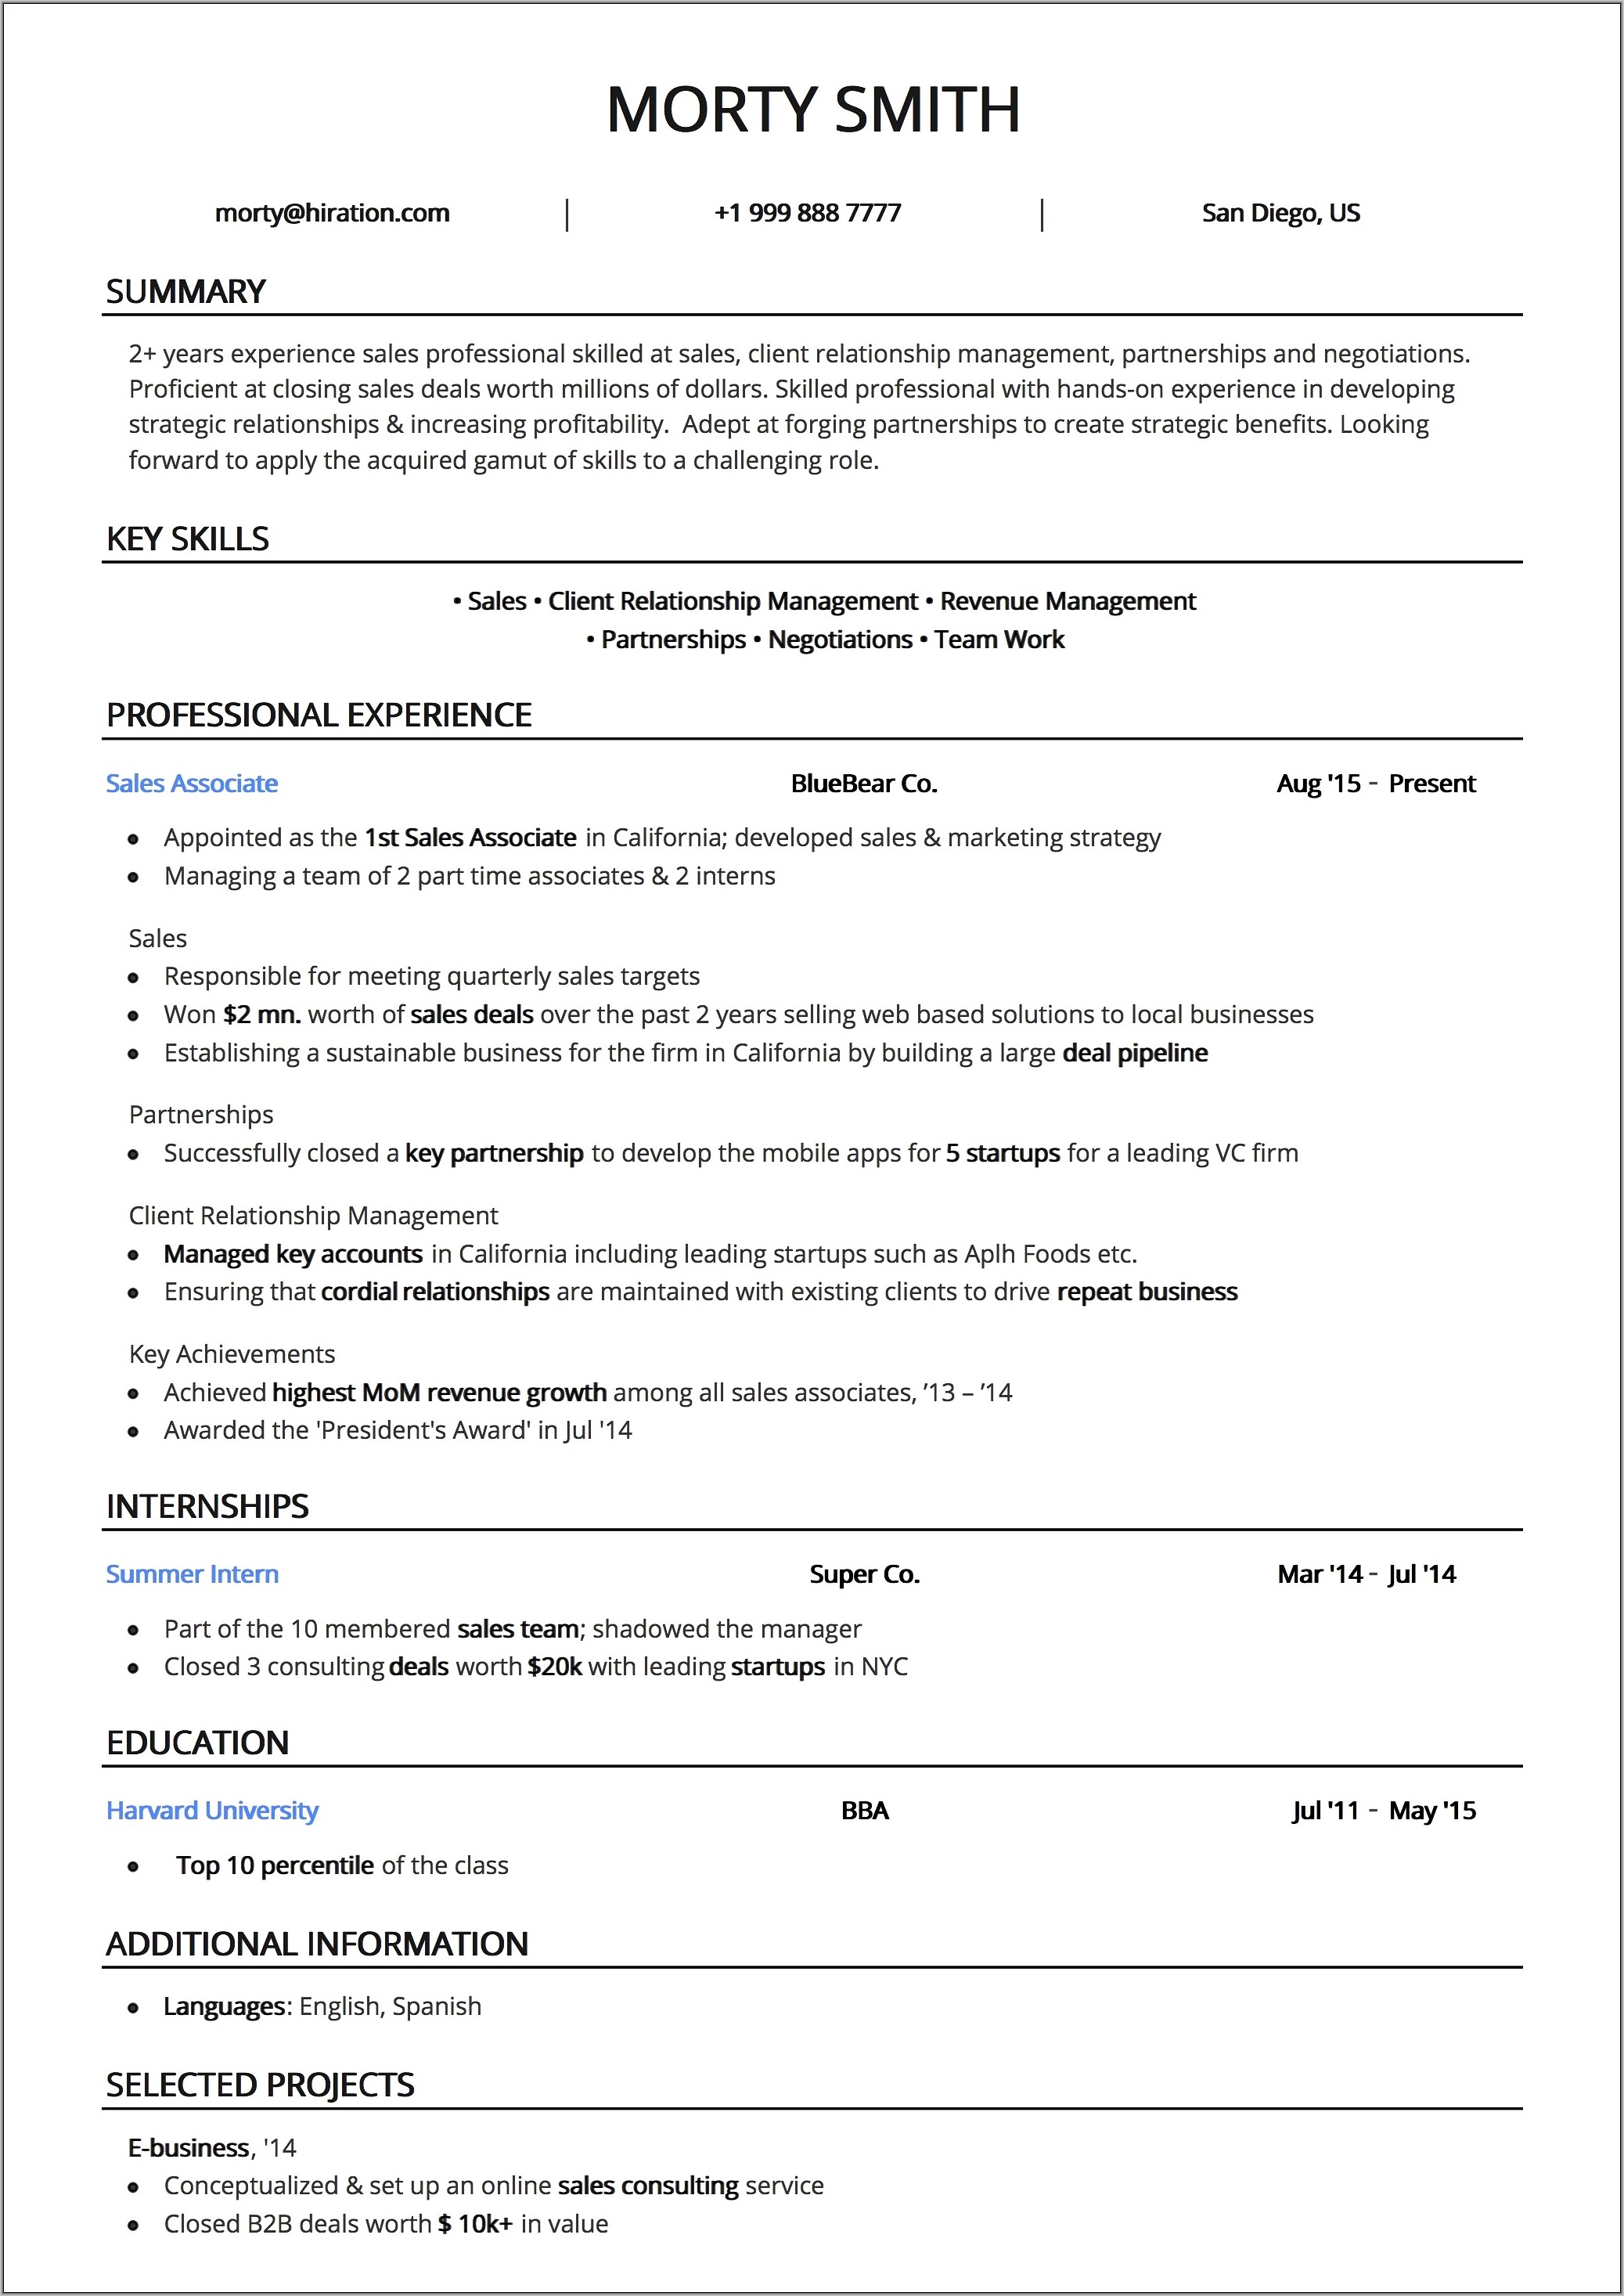 Samples Of Best Professional Resumes